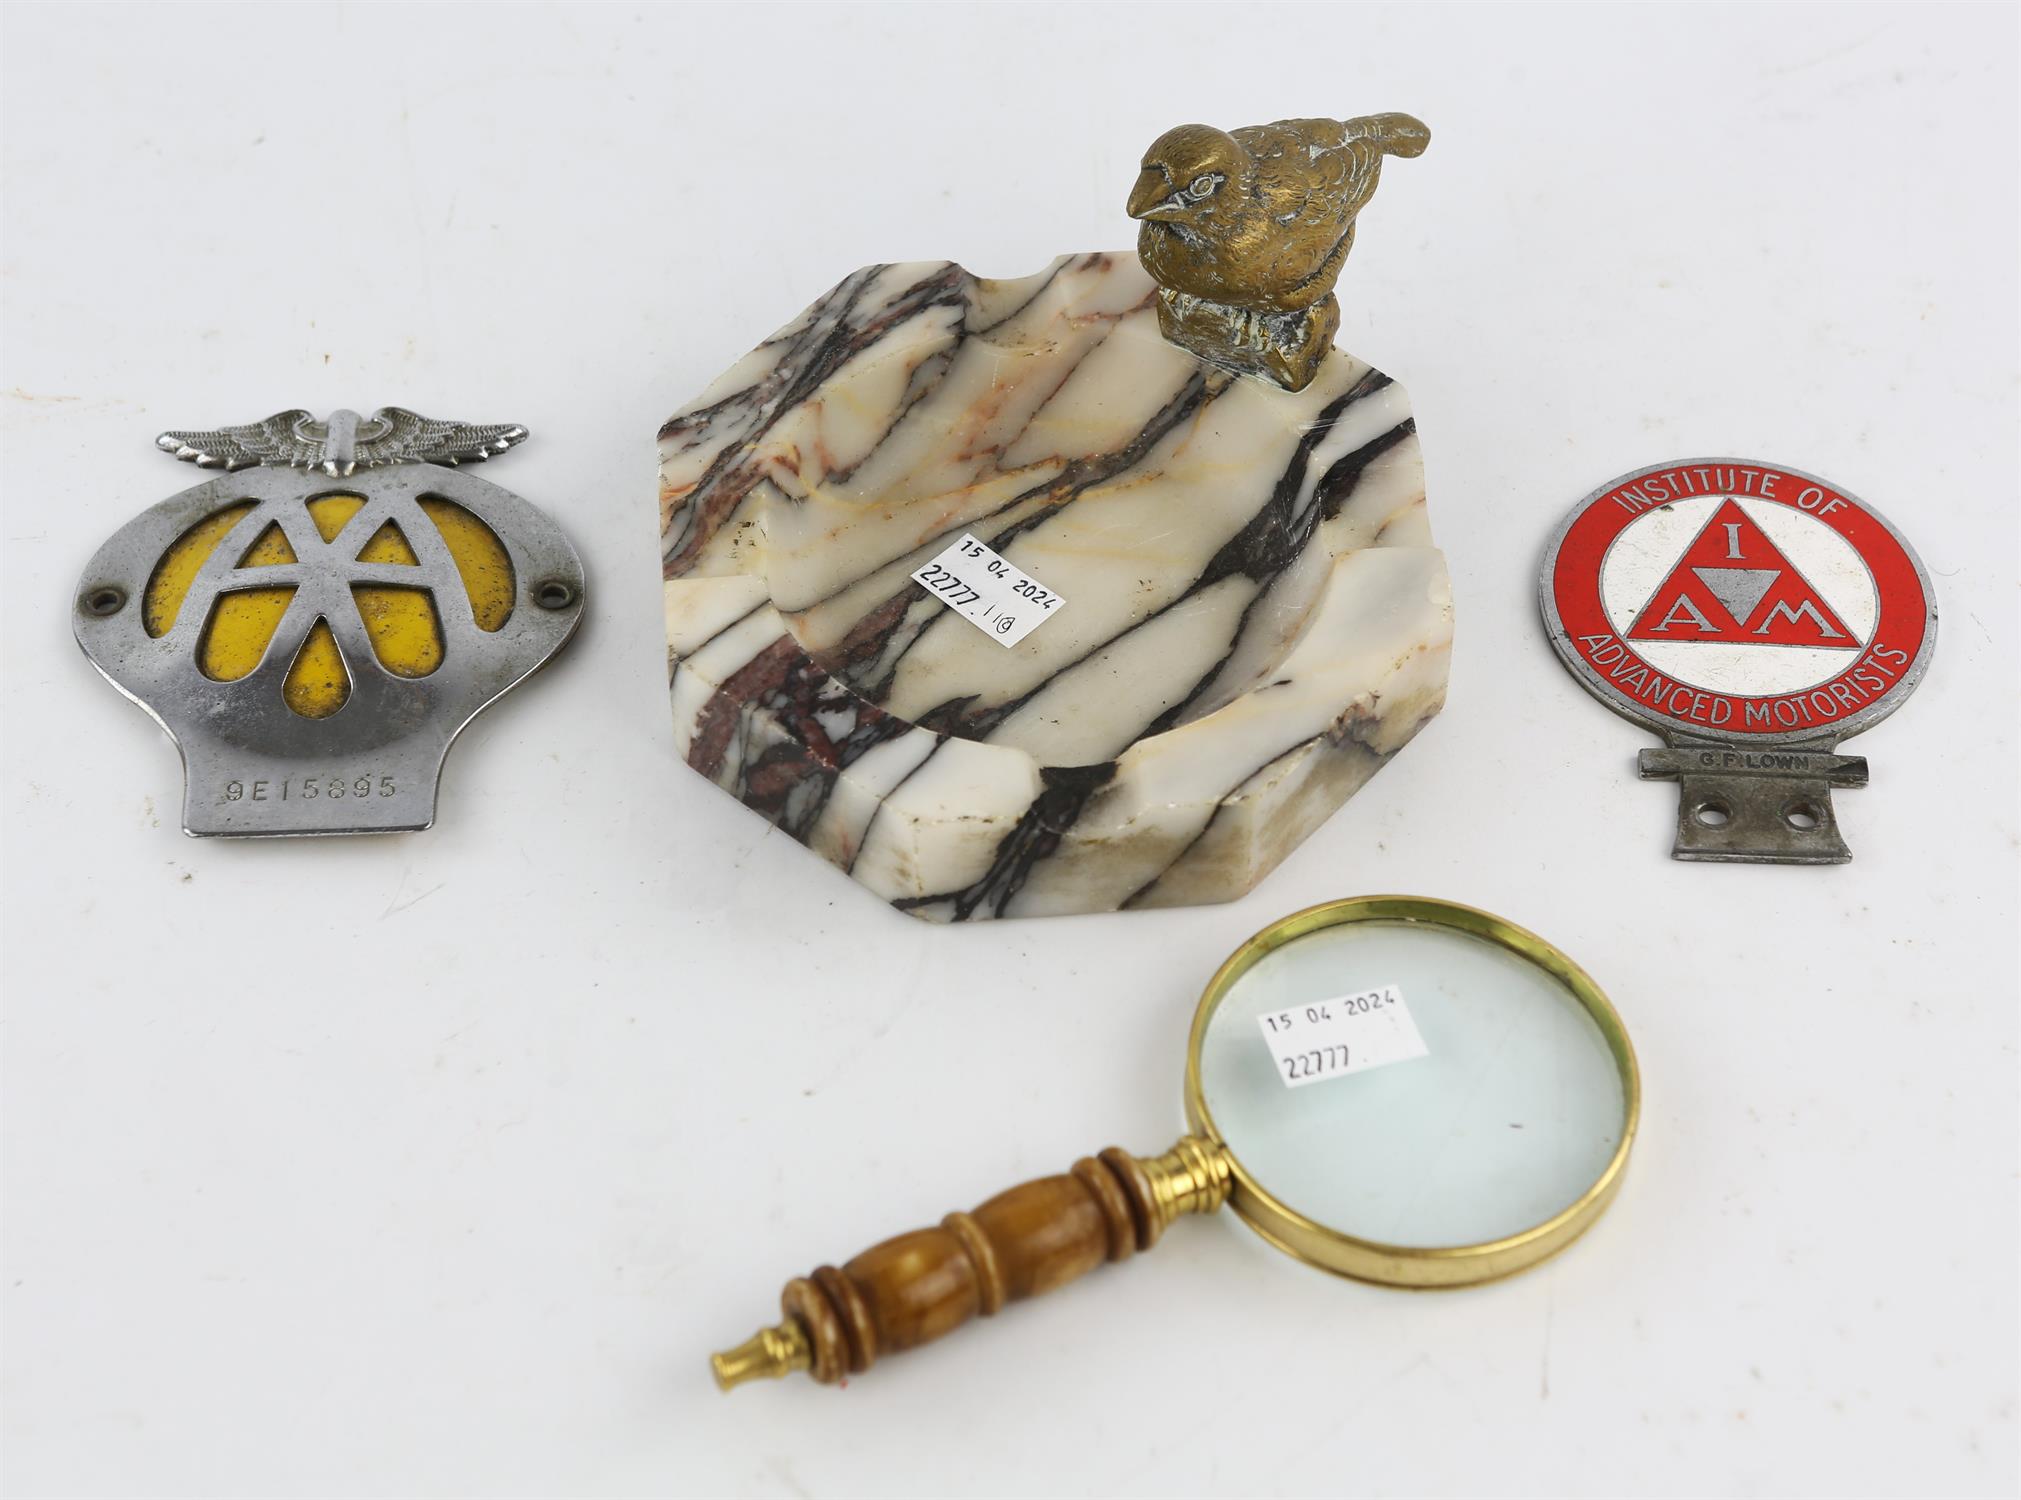 Institute of Advanced Motorists and A A bumper badges, marble ashtray with brass bird and a